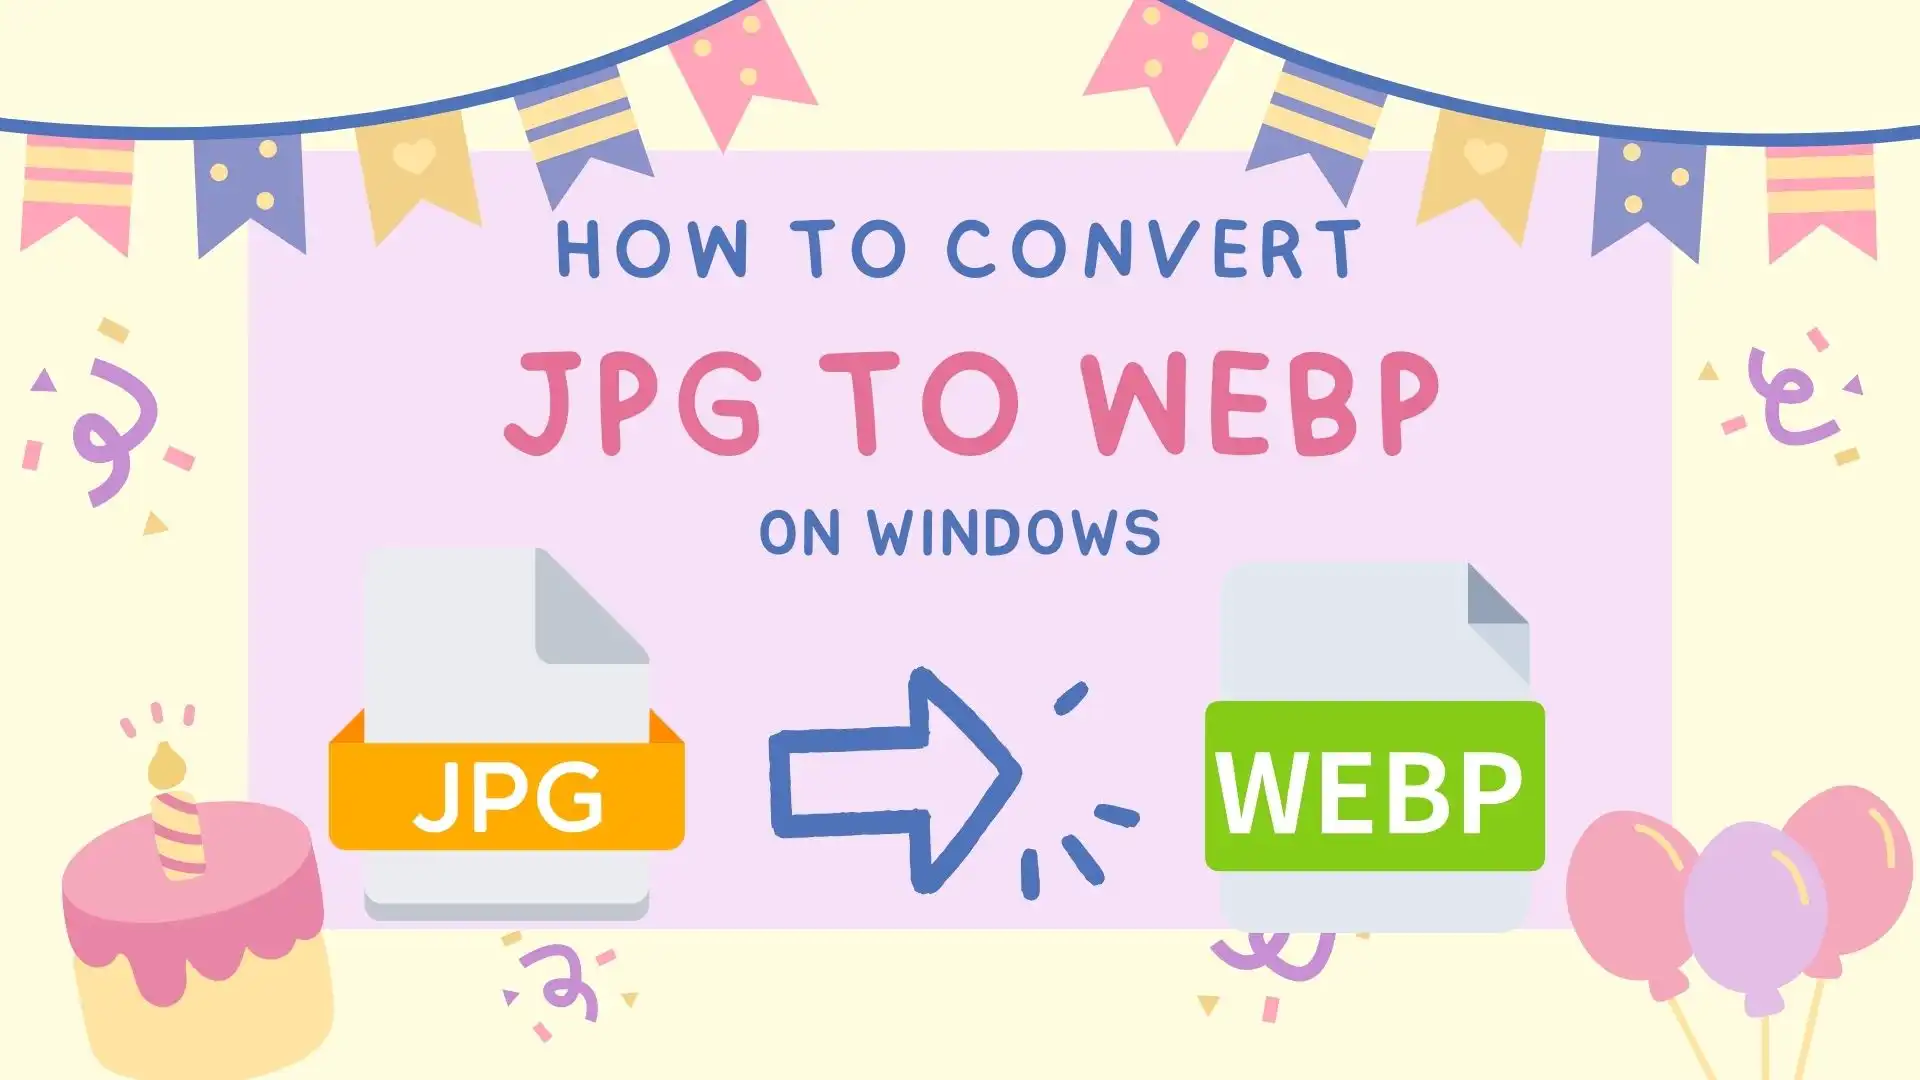 Best-pick 8 Tools for Converting WebP to GIF Files